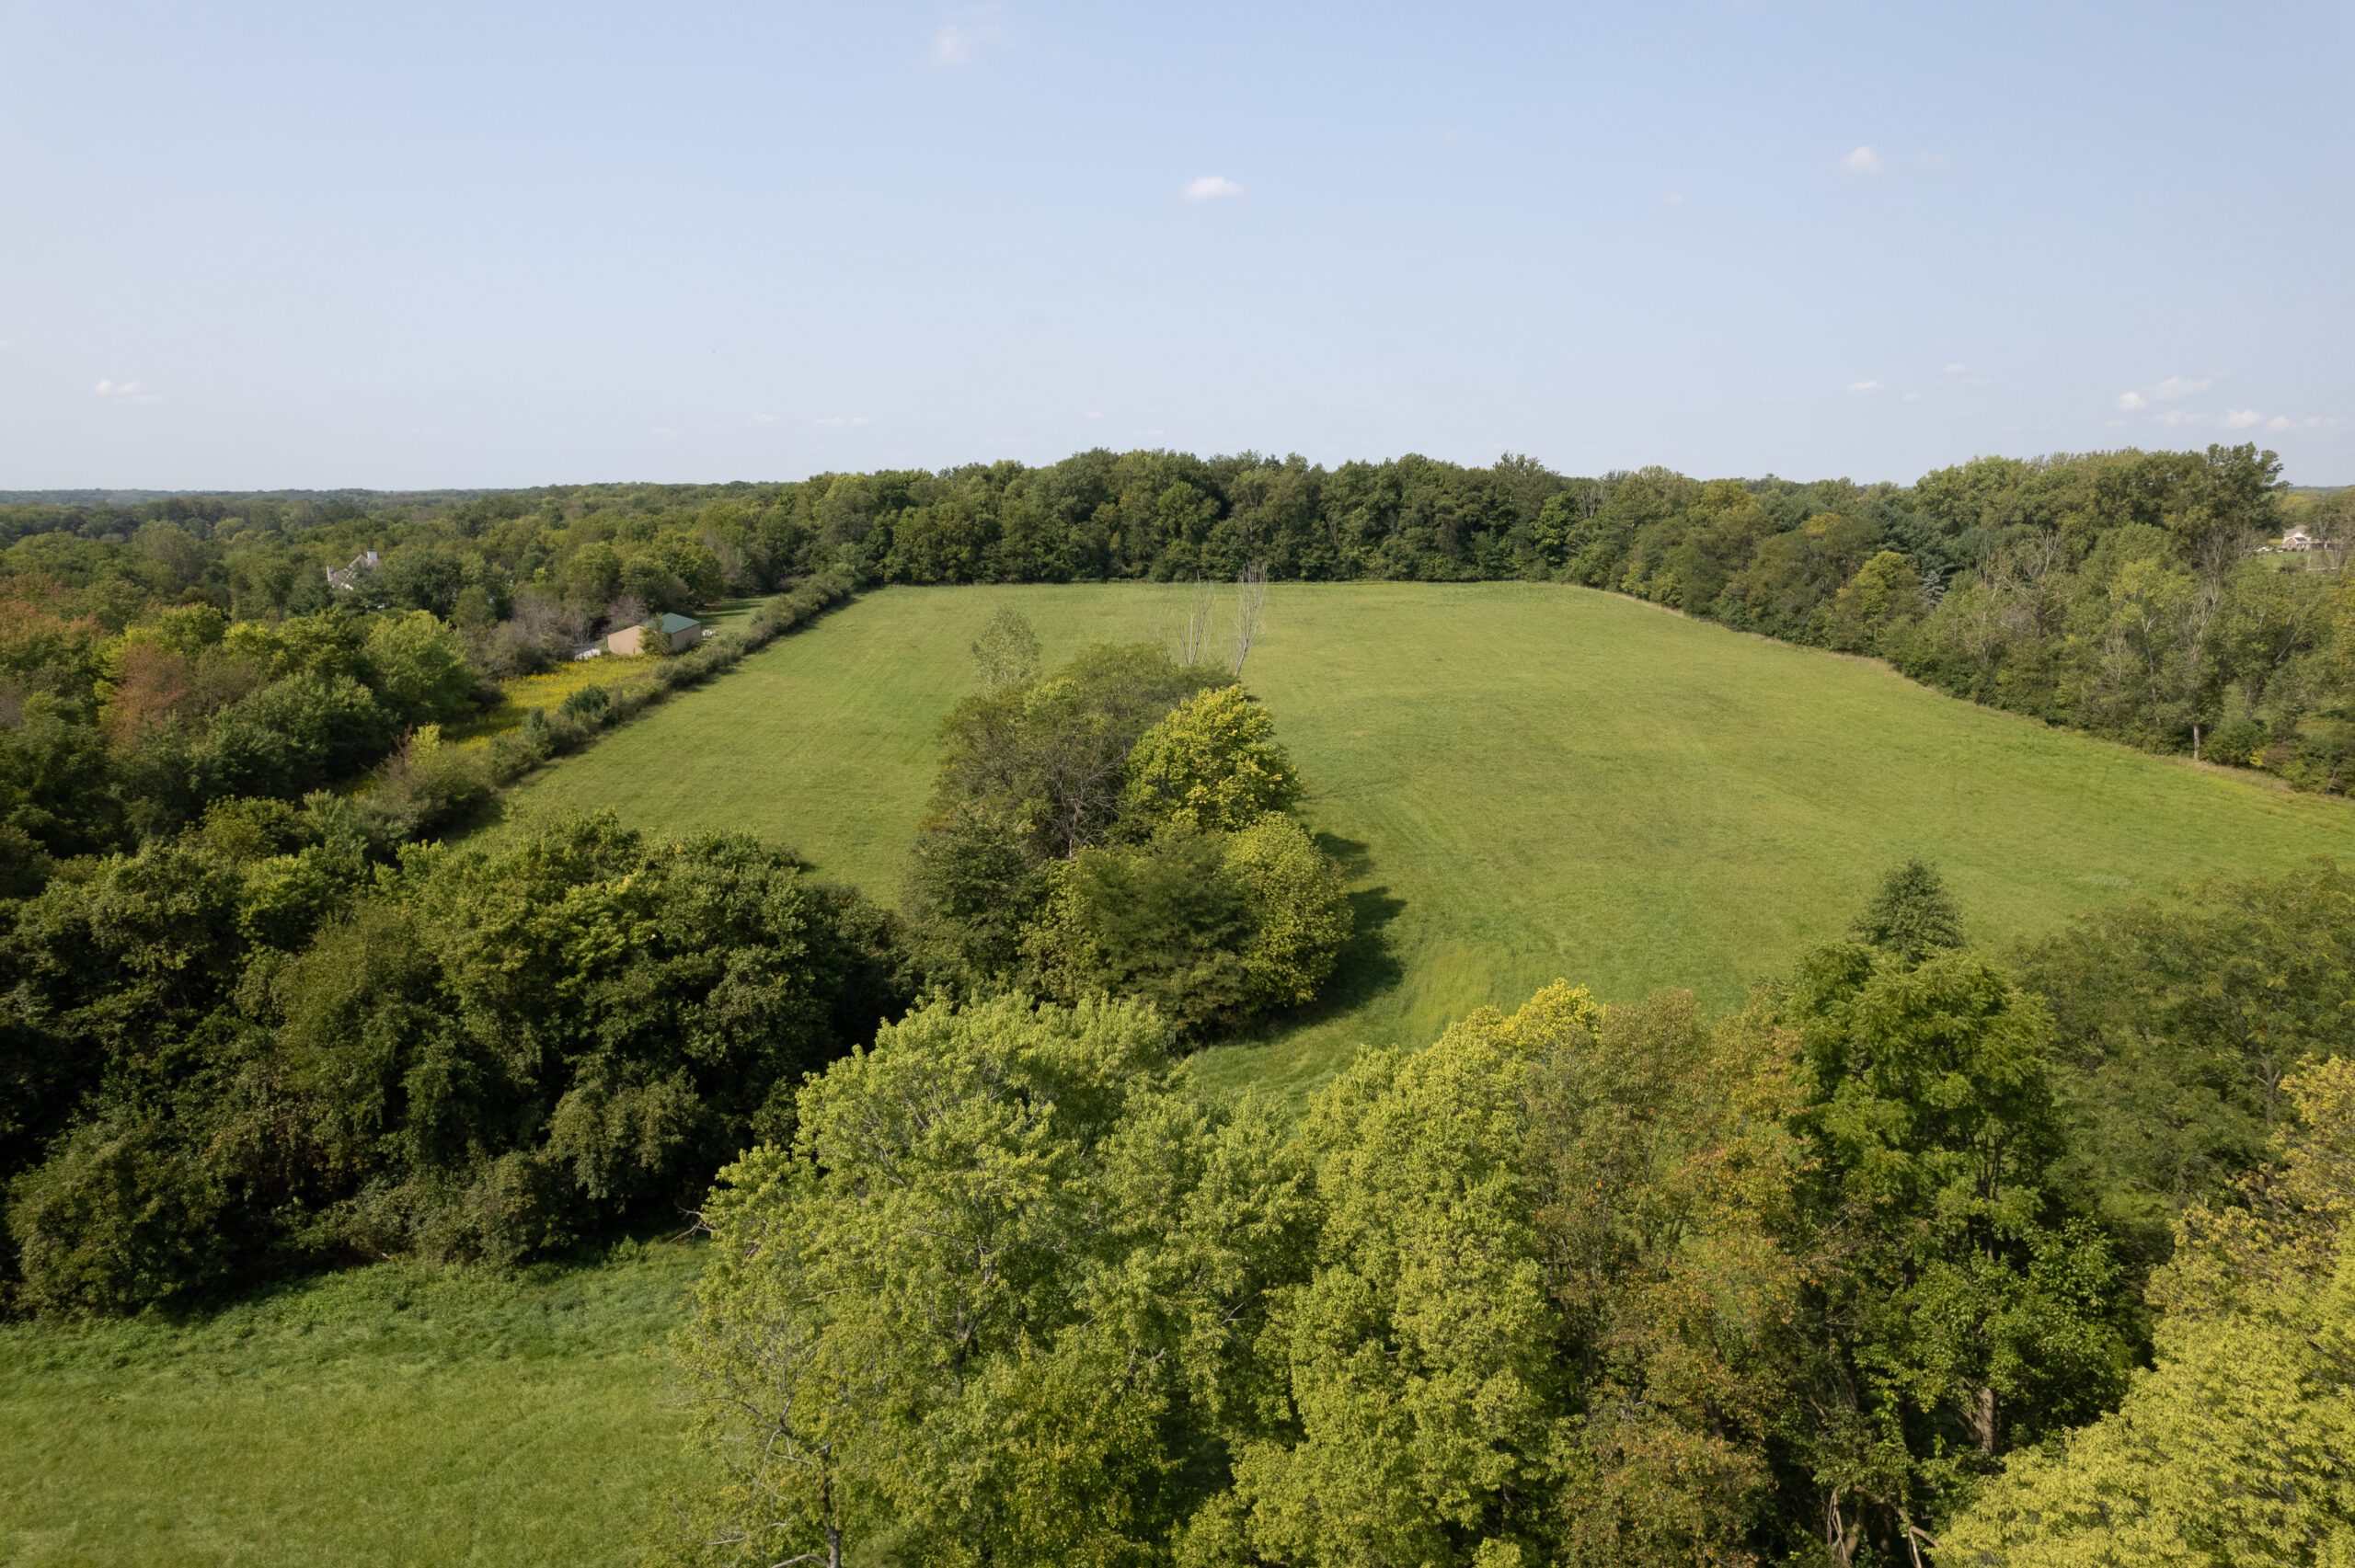 Aerial view of a green field lined with trees.